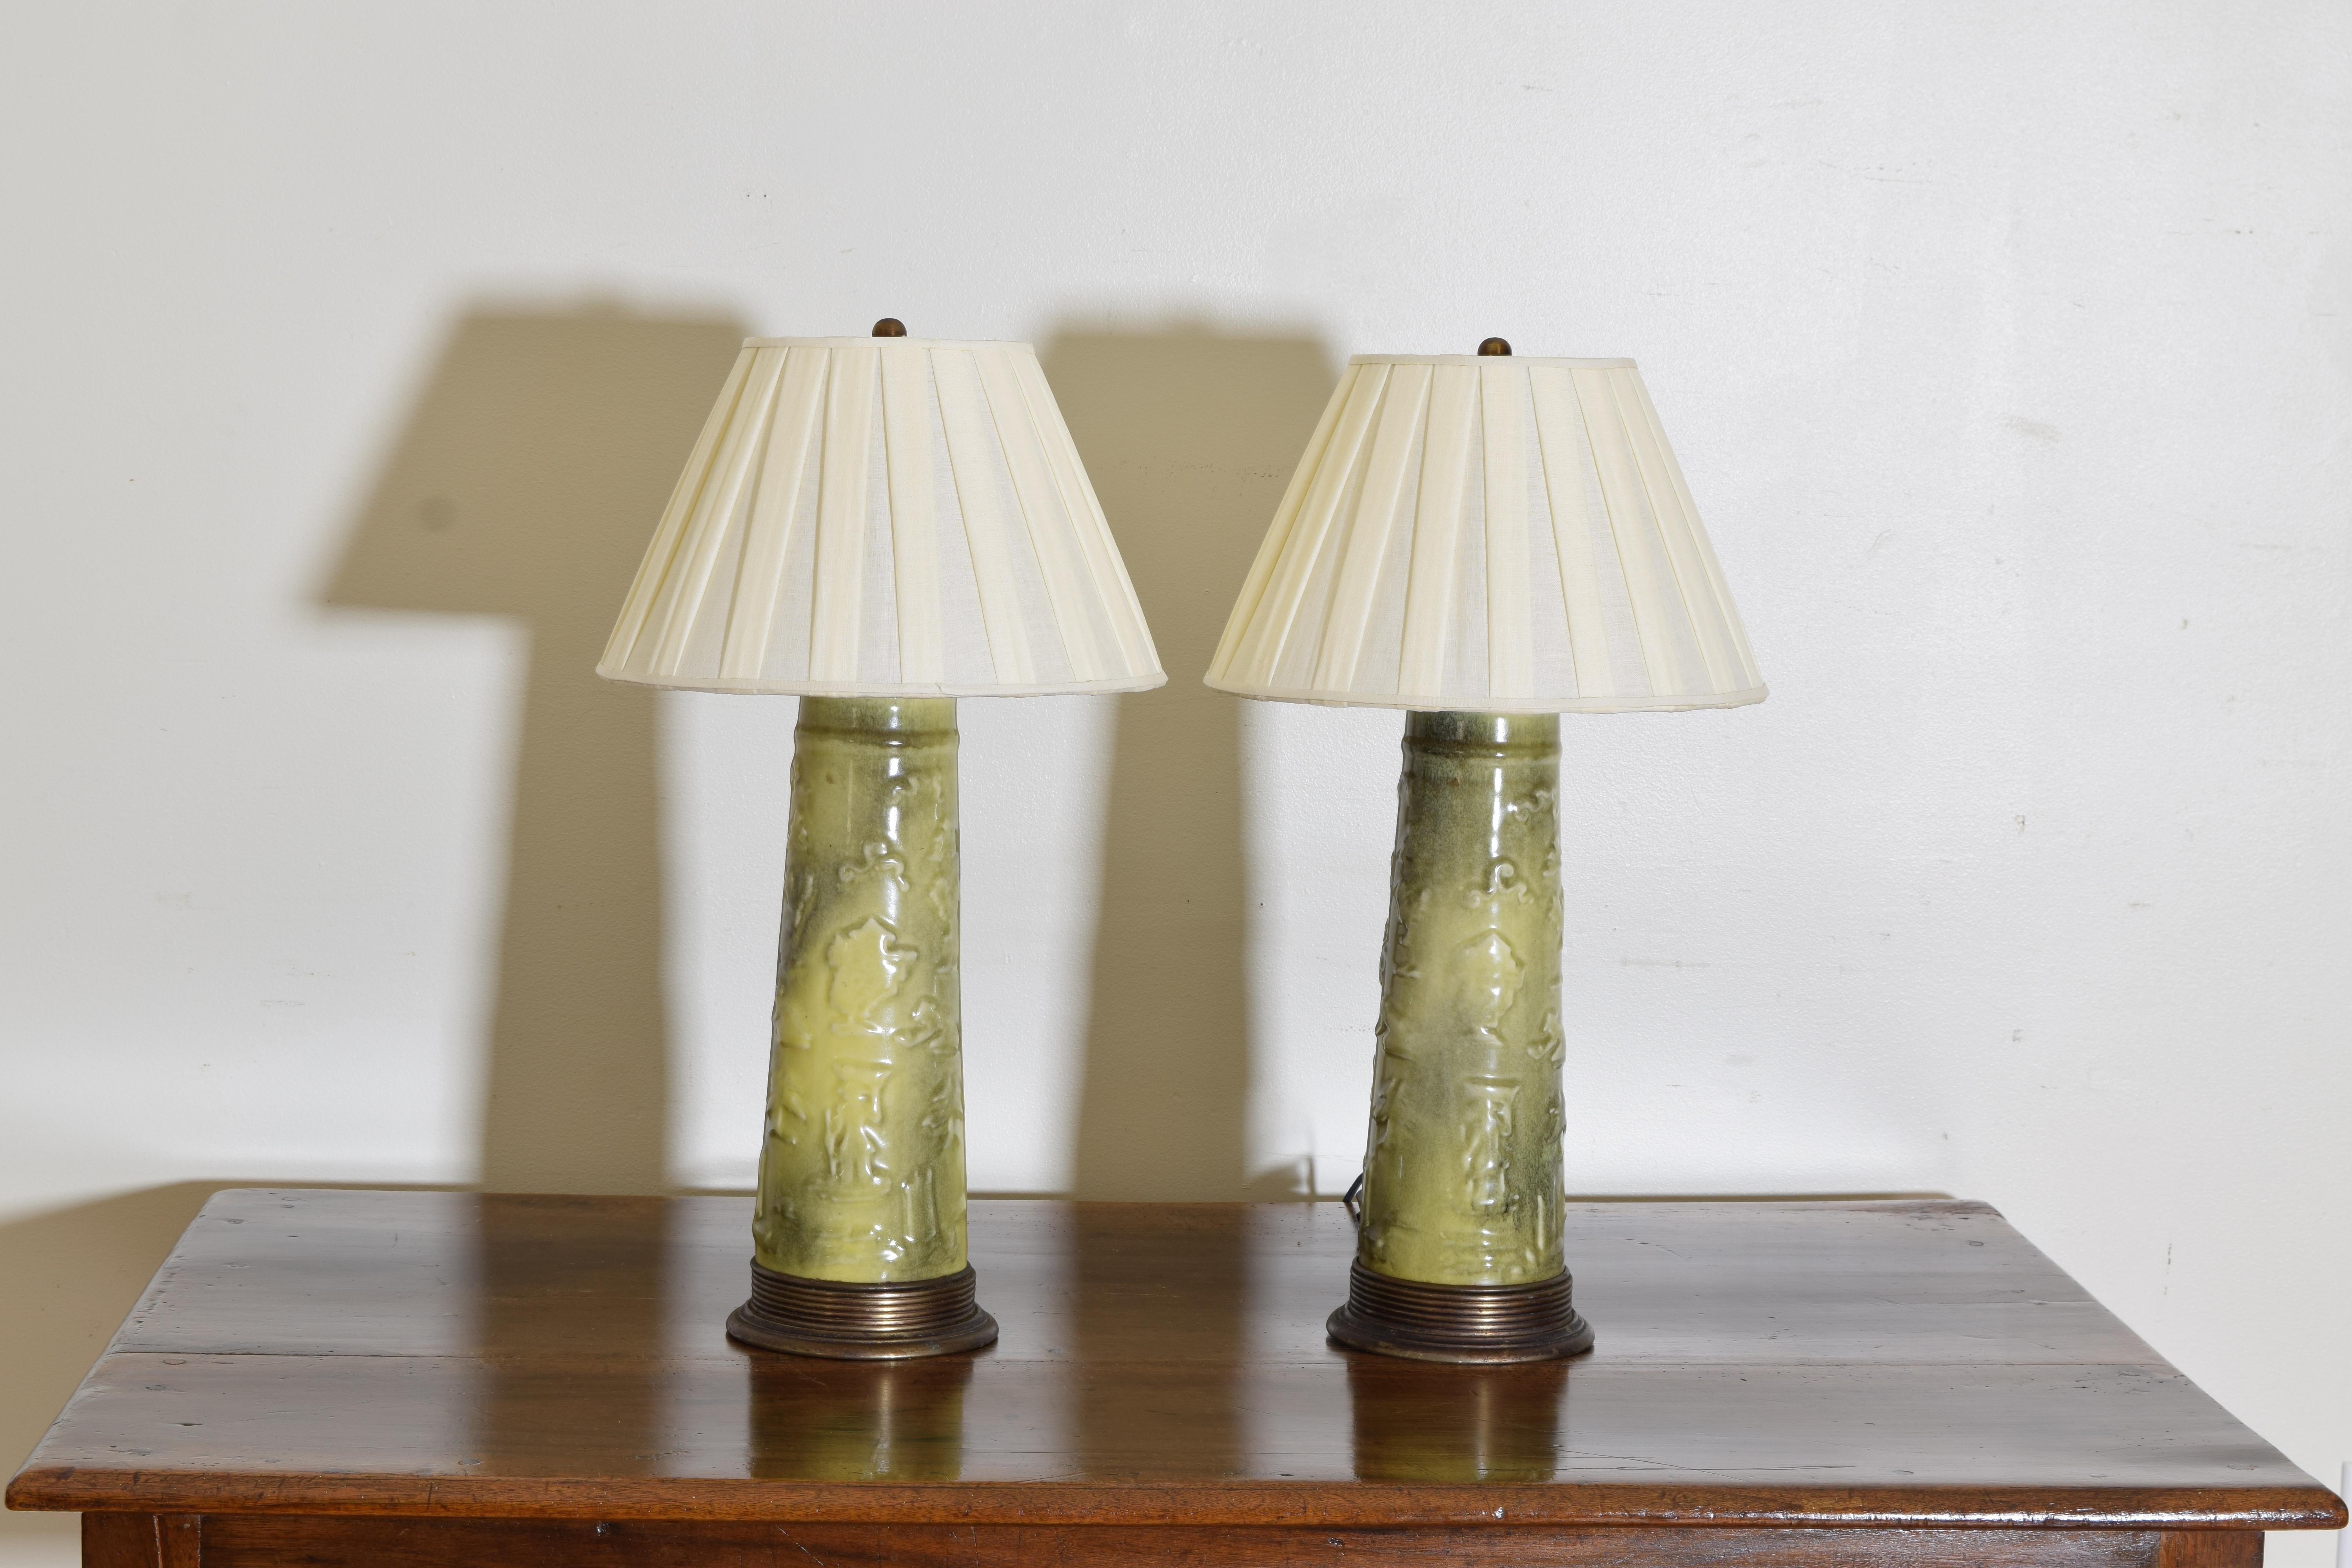 Cast ceramic lamps with raised foliage and figurative designs mounted on tapered brass bases with brass tops